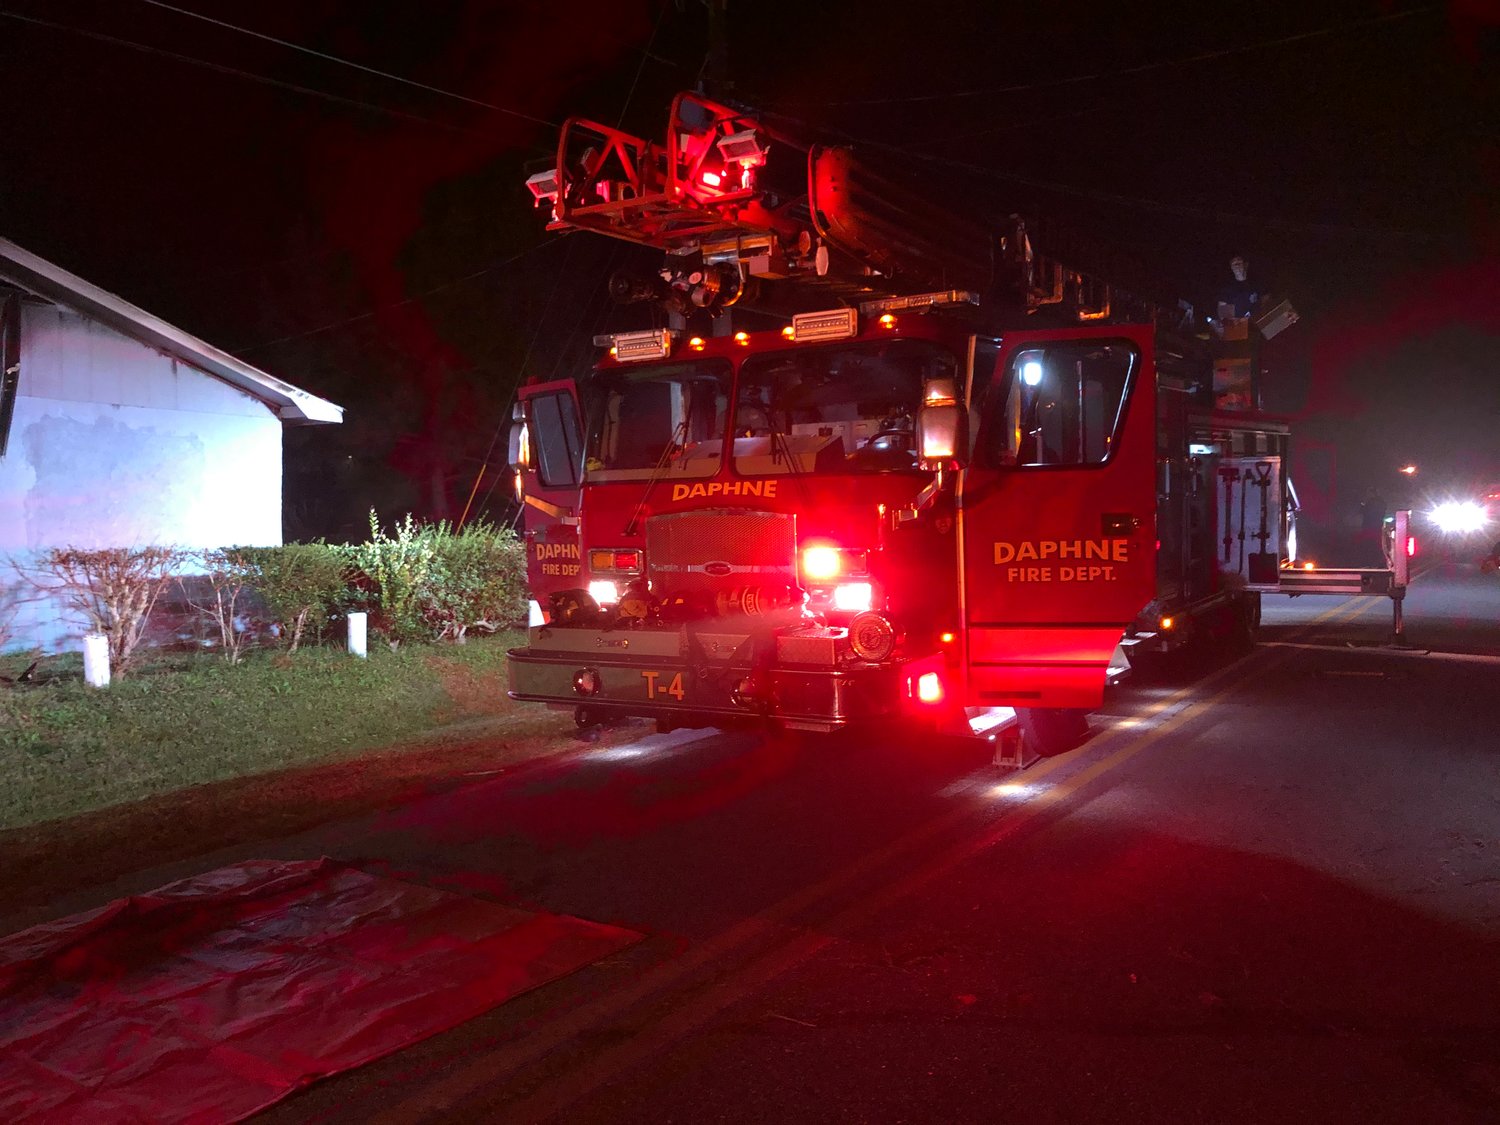 A Daphne fire truck responds to a house fire call. Firefighters and other Daphne first-responders will be getting hazardous duty pay during the COVID 19 outbreak.